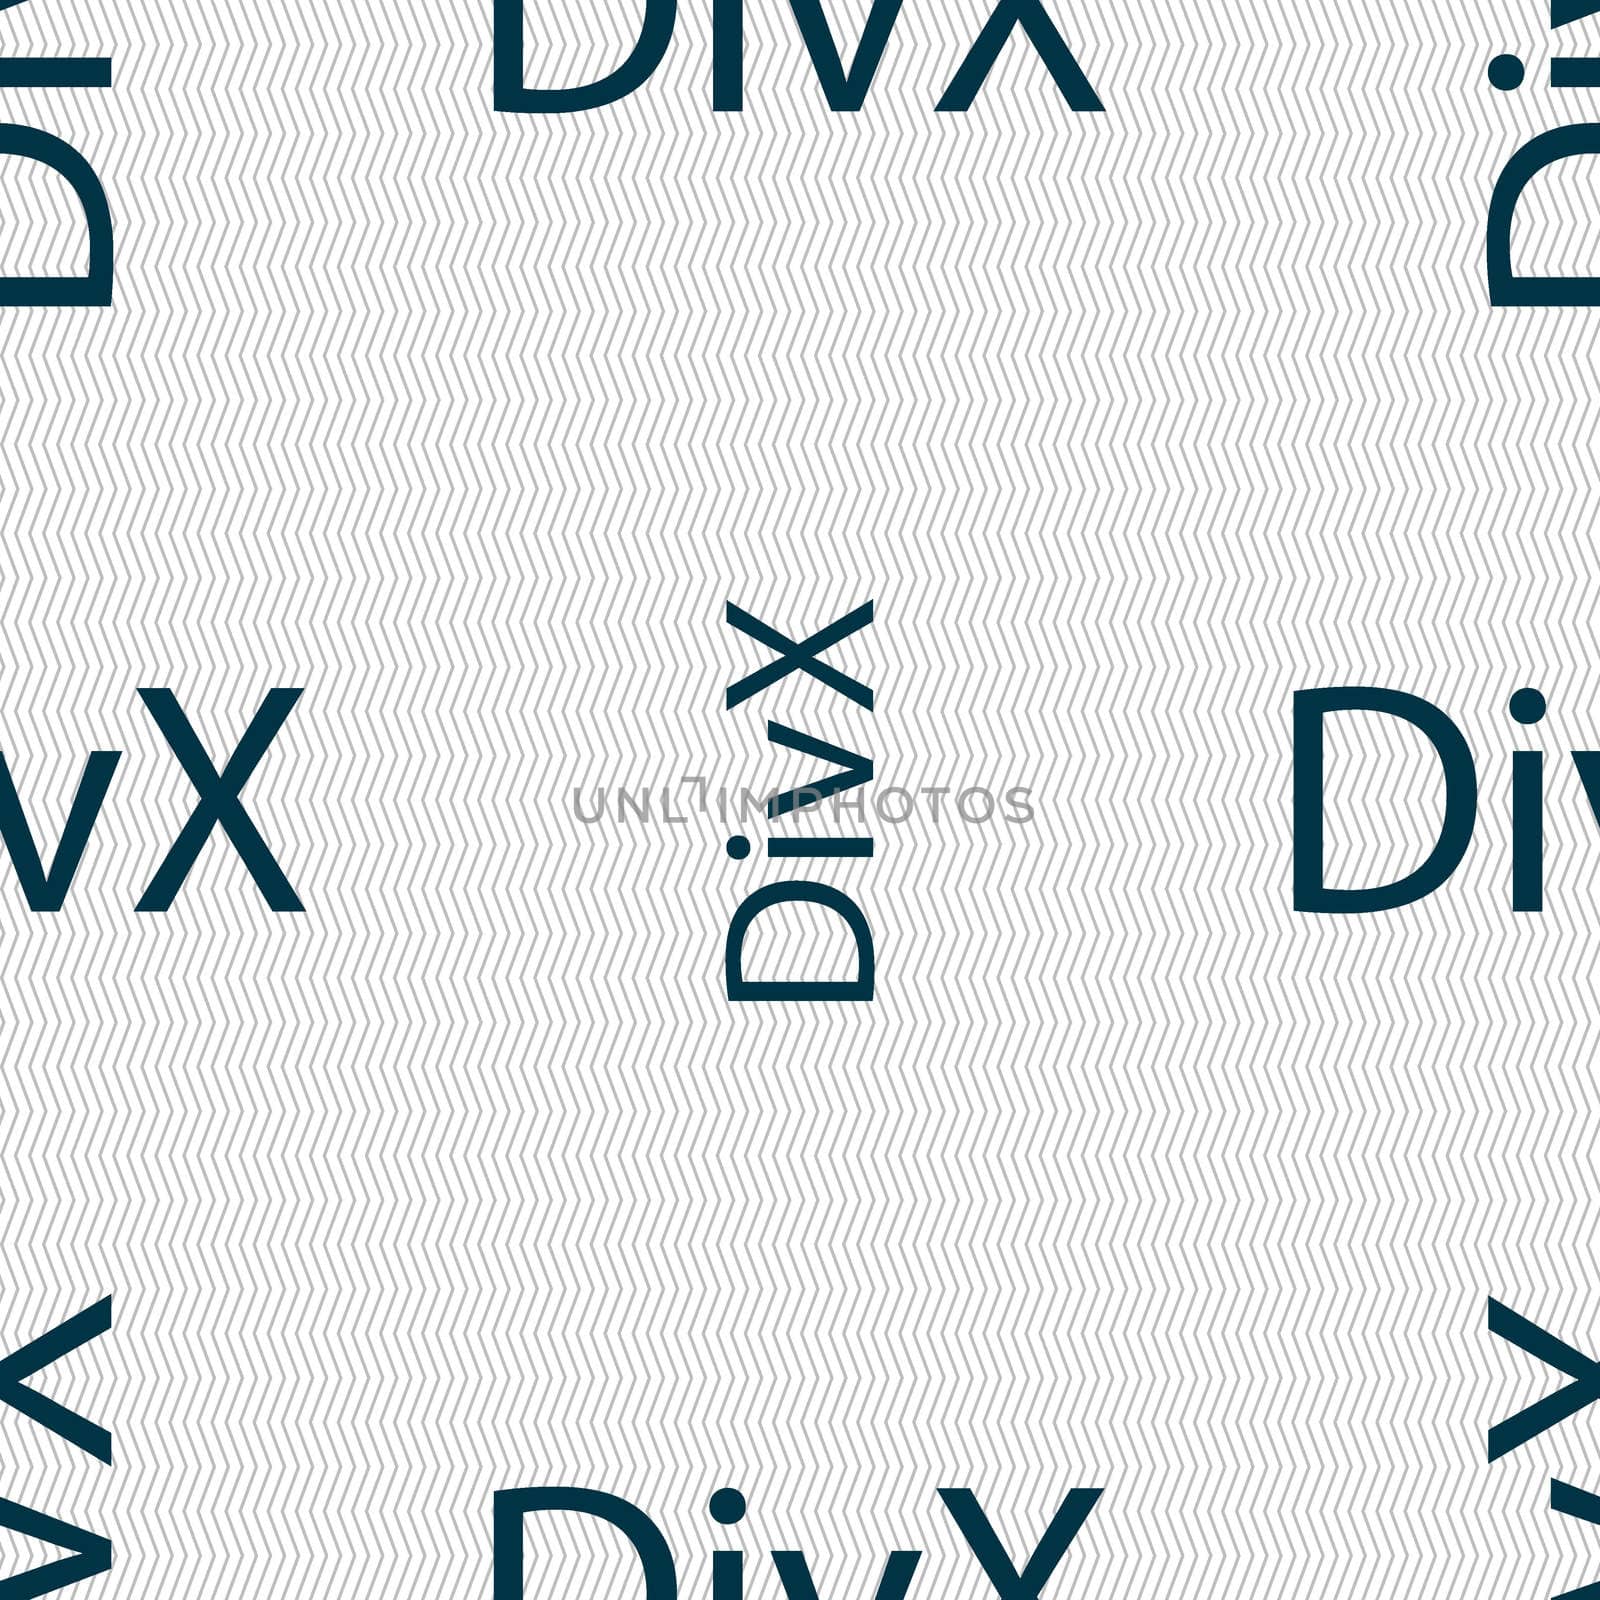 DivX video format sign icon. symbol. Seamless abstract background with geometric shapes. illustration